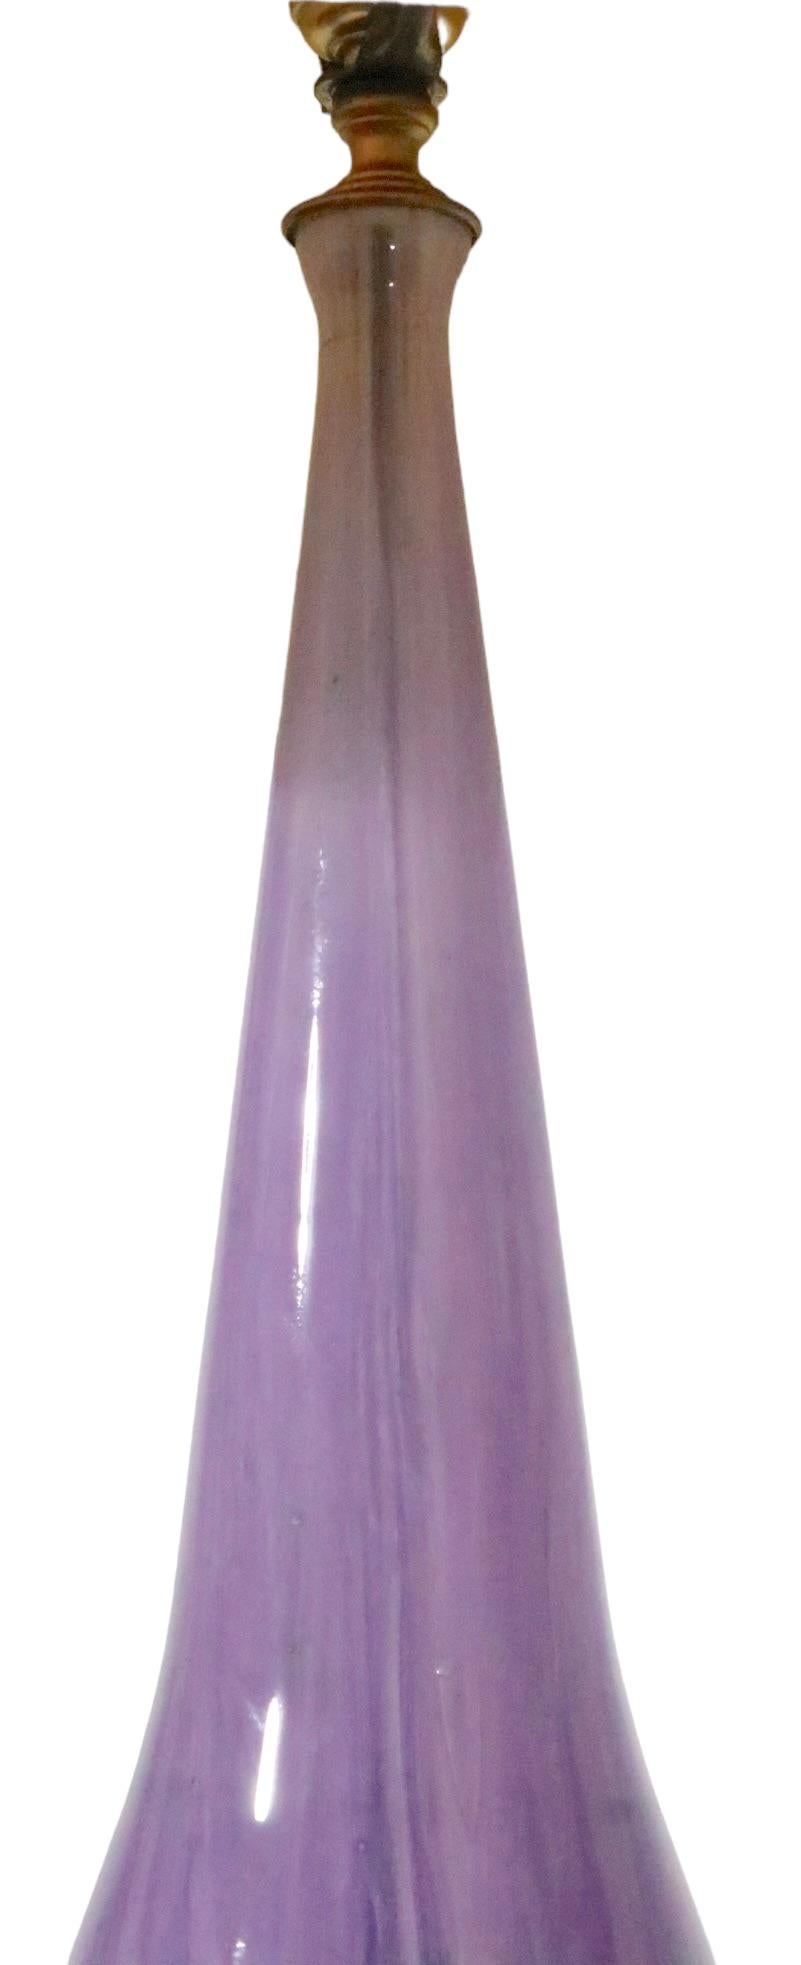 Large Murano Glass Table Lamp in Lavender Glass, circa 1950/1960s For Sale 2